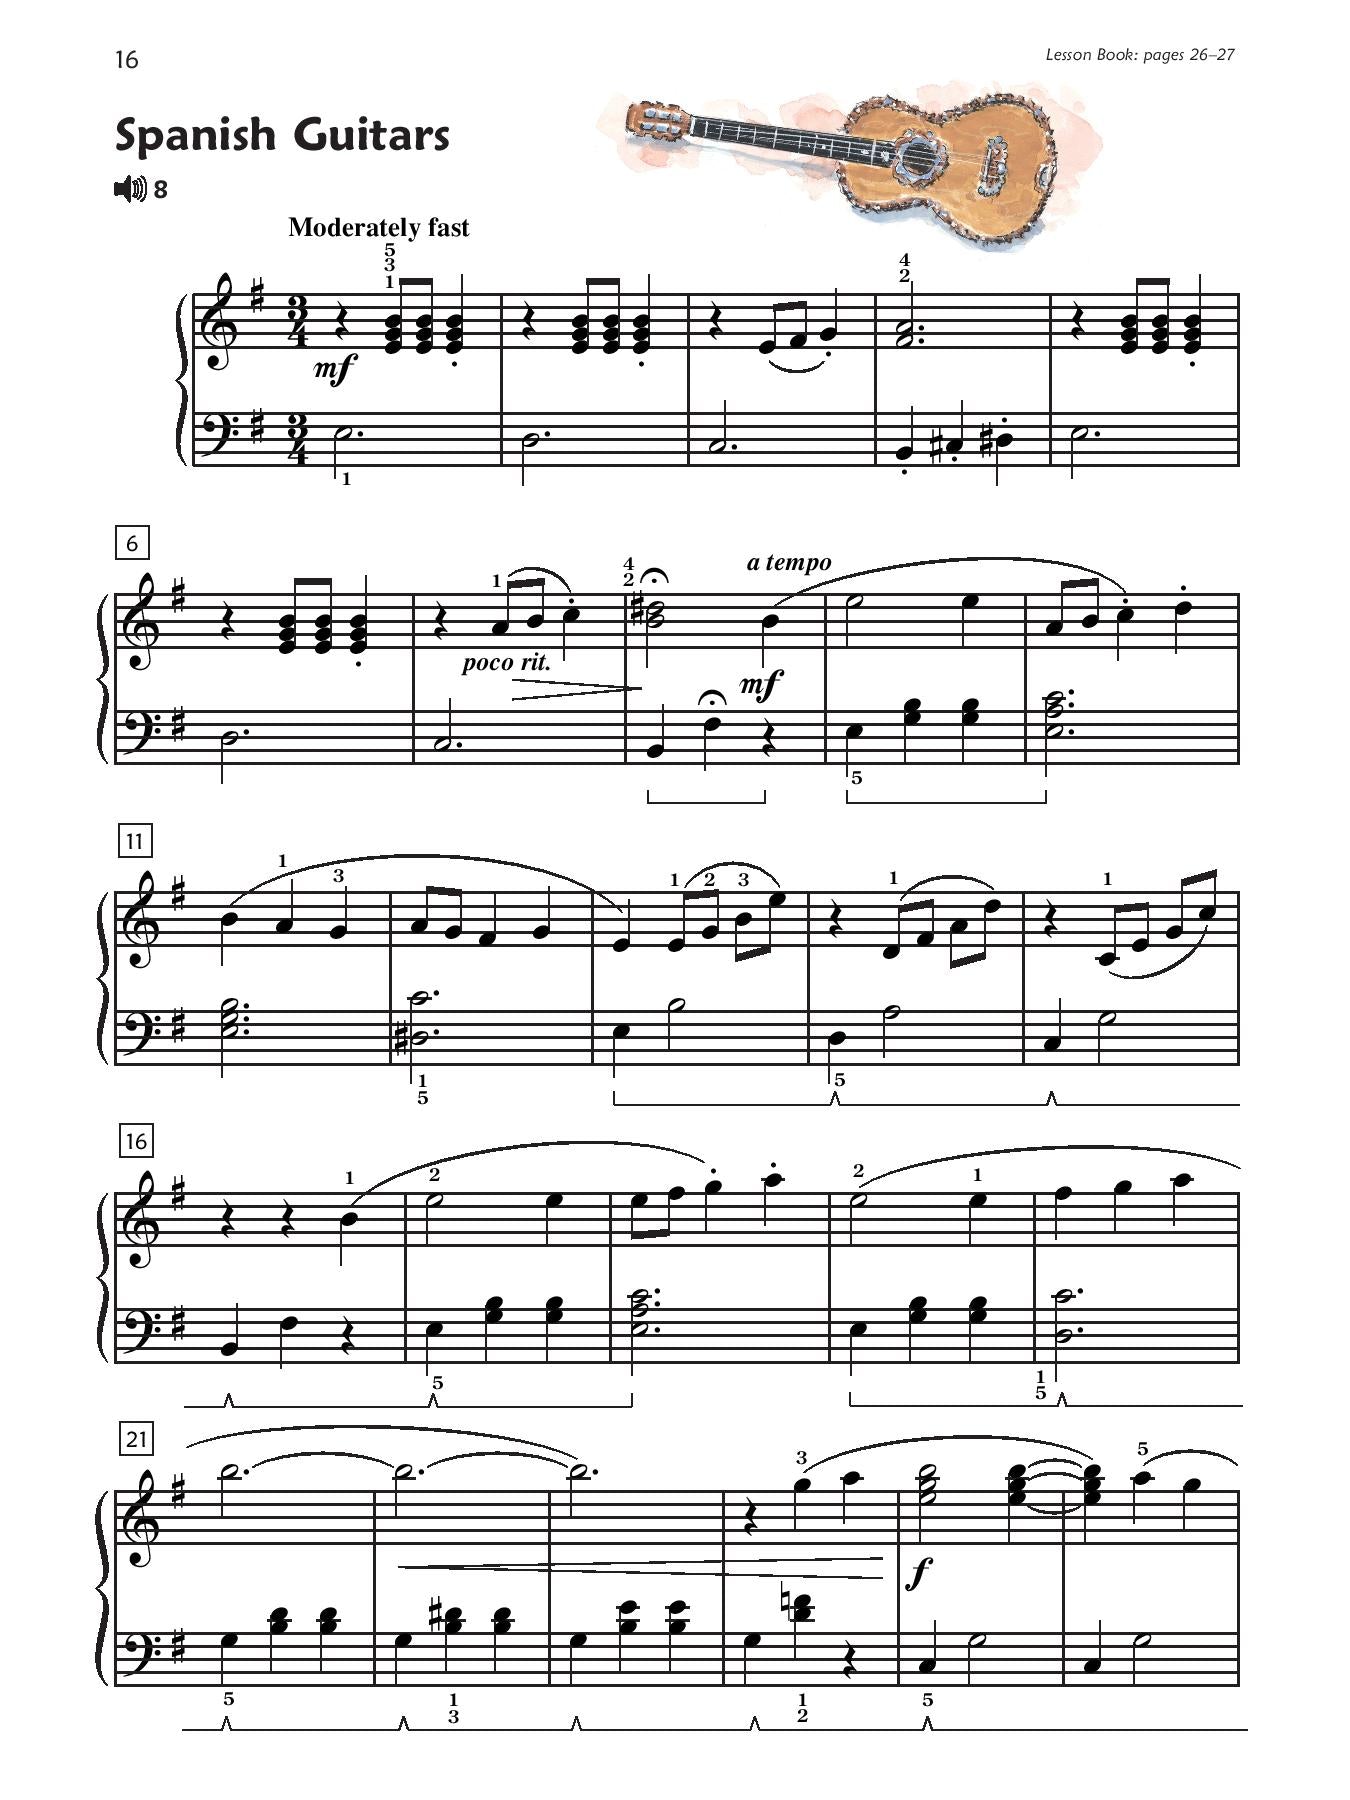 Alfred's Premier Piano Course, Performance 4